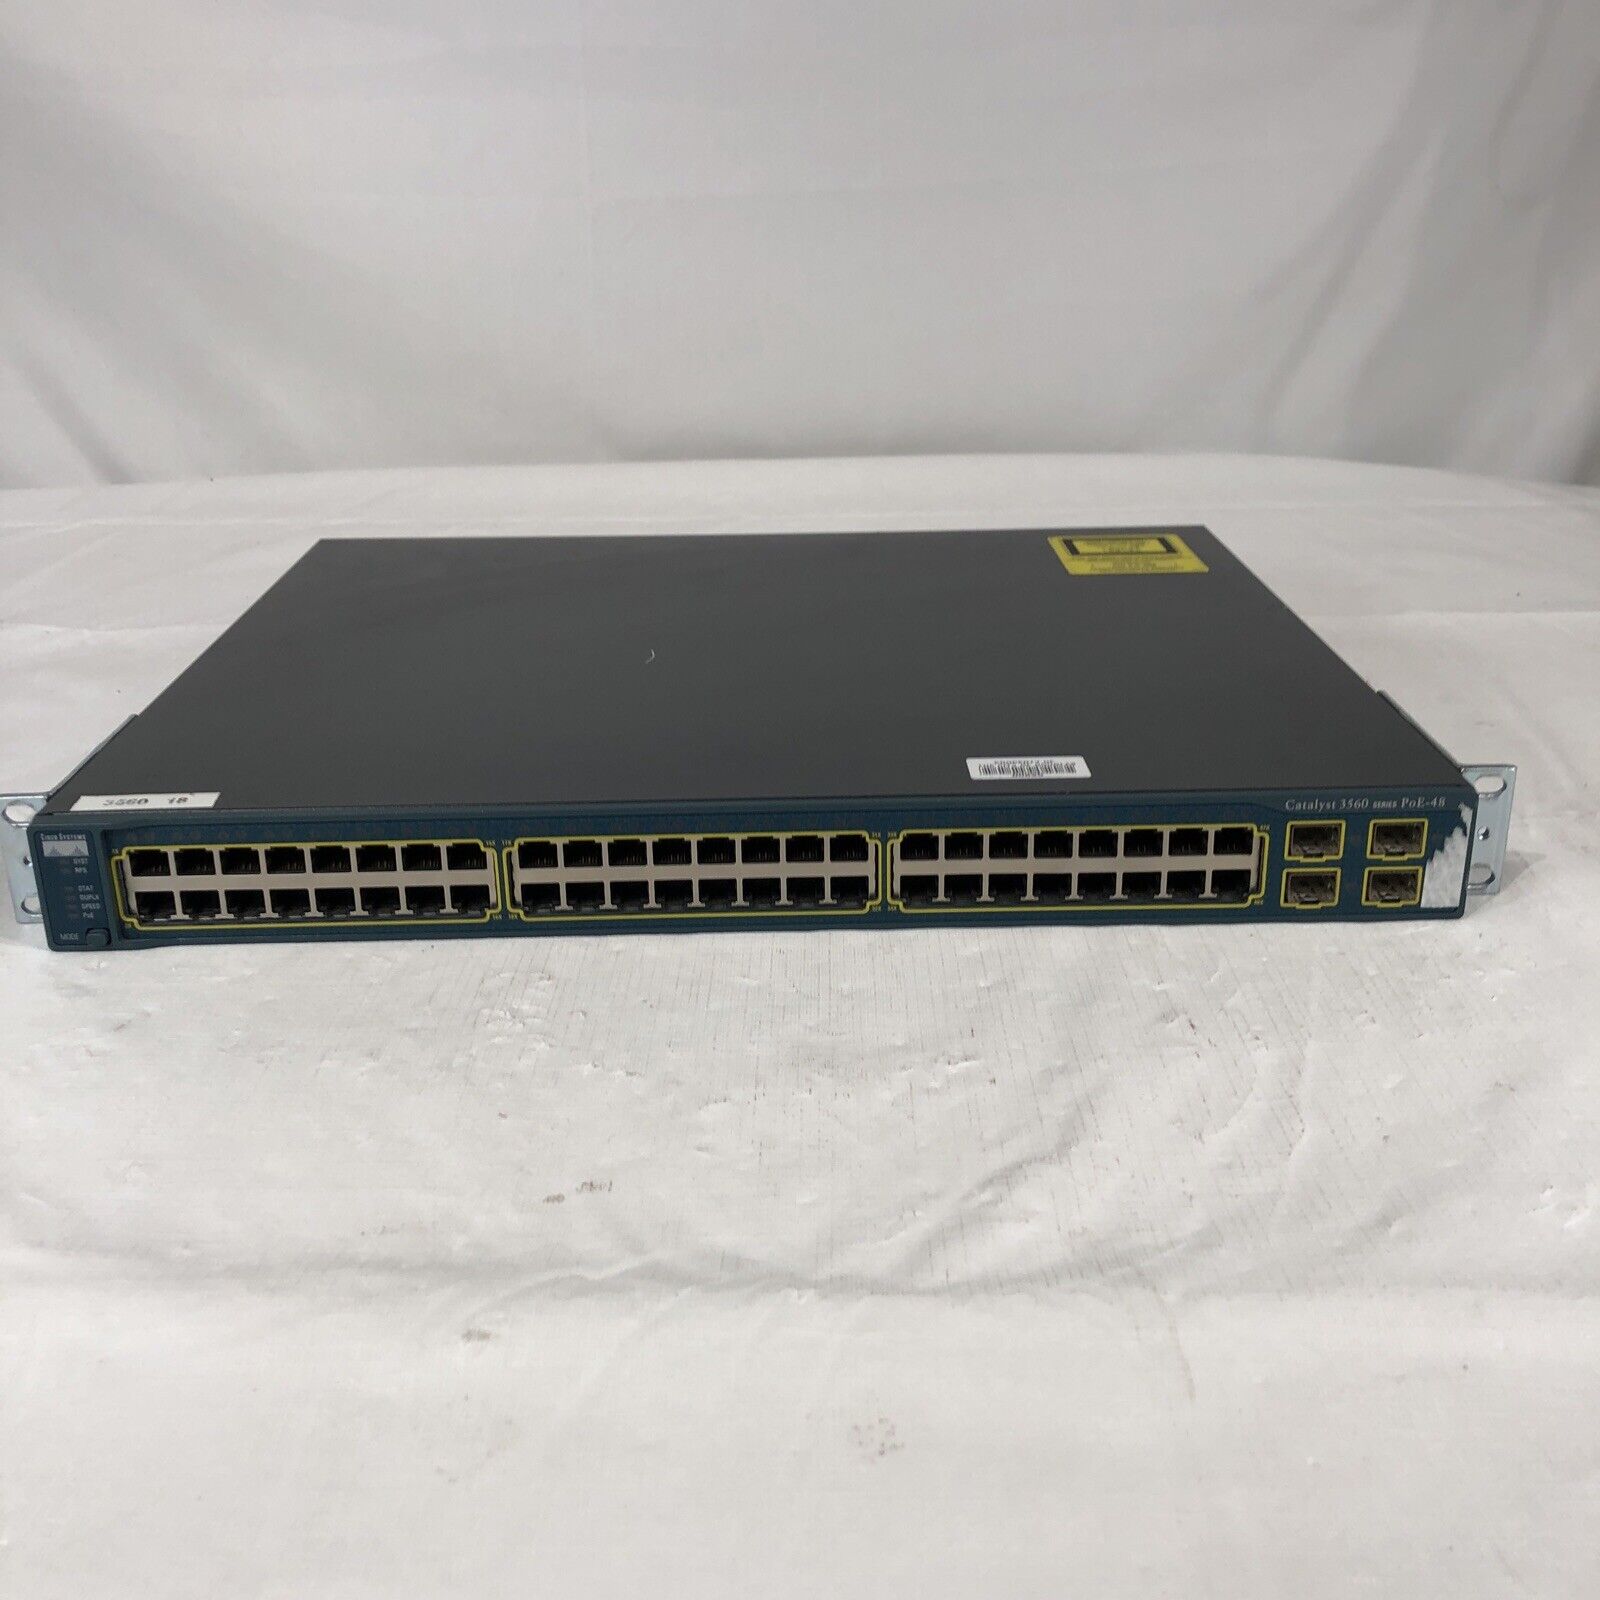 Cisco Catalyst 3560 Series WS-C3560-48PS-S 48 Port PoE-48 Managed Switch